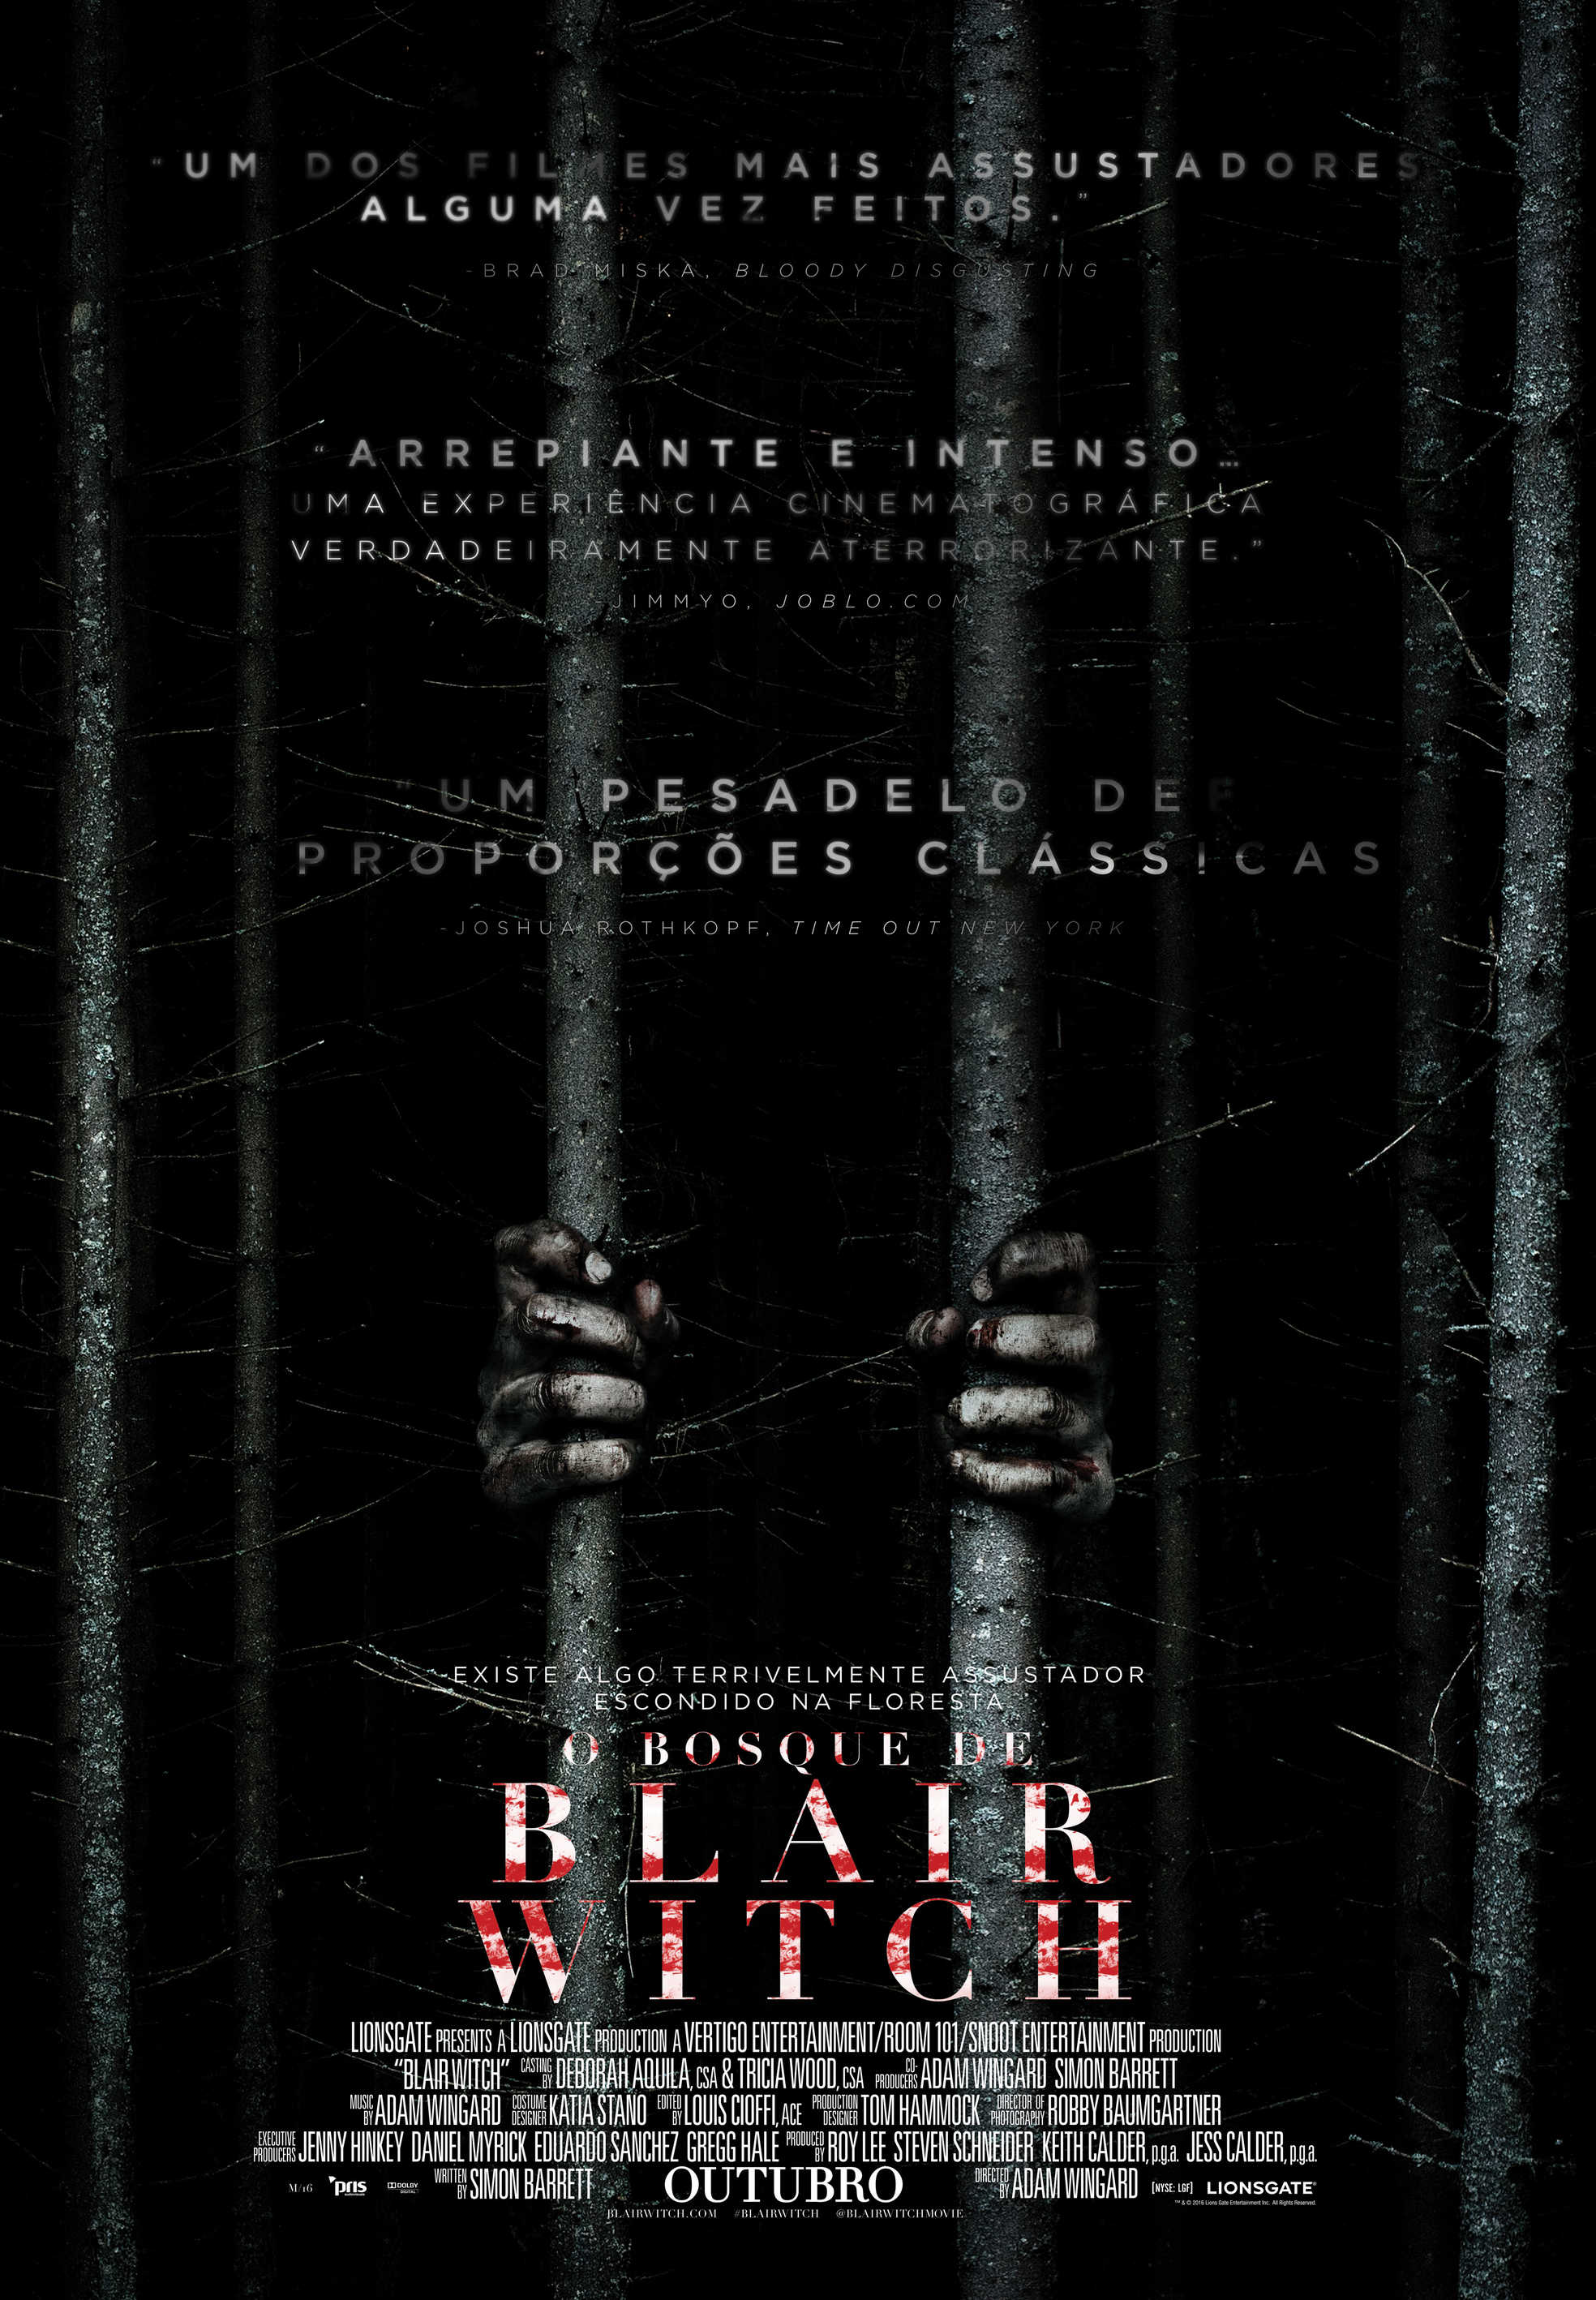 blair-witch_poster_70x100cm